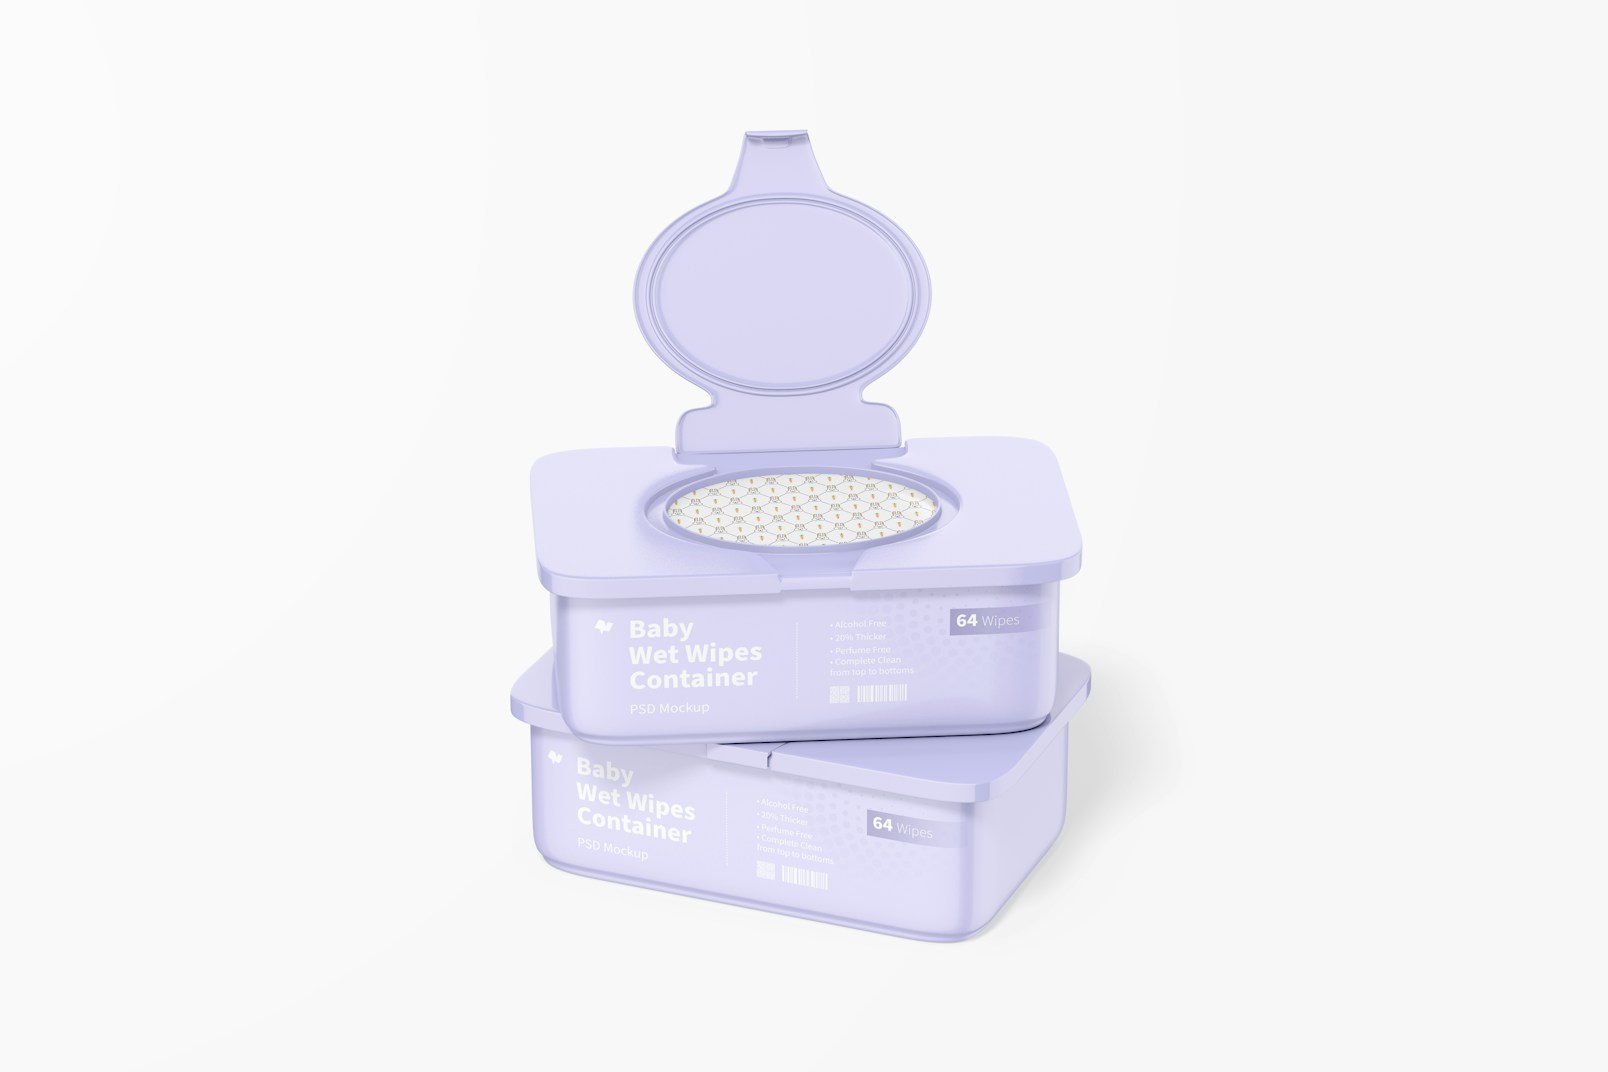 Baby Wet Wipes Containers Mockup, Stacked